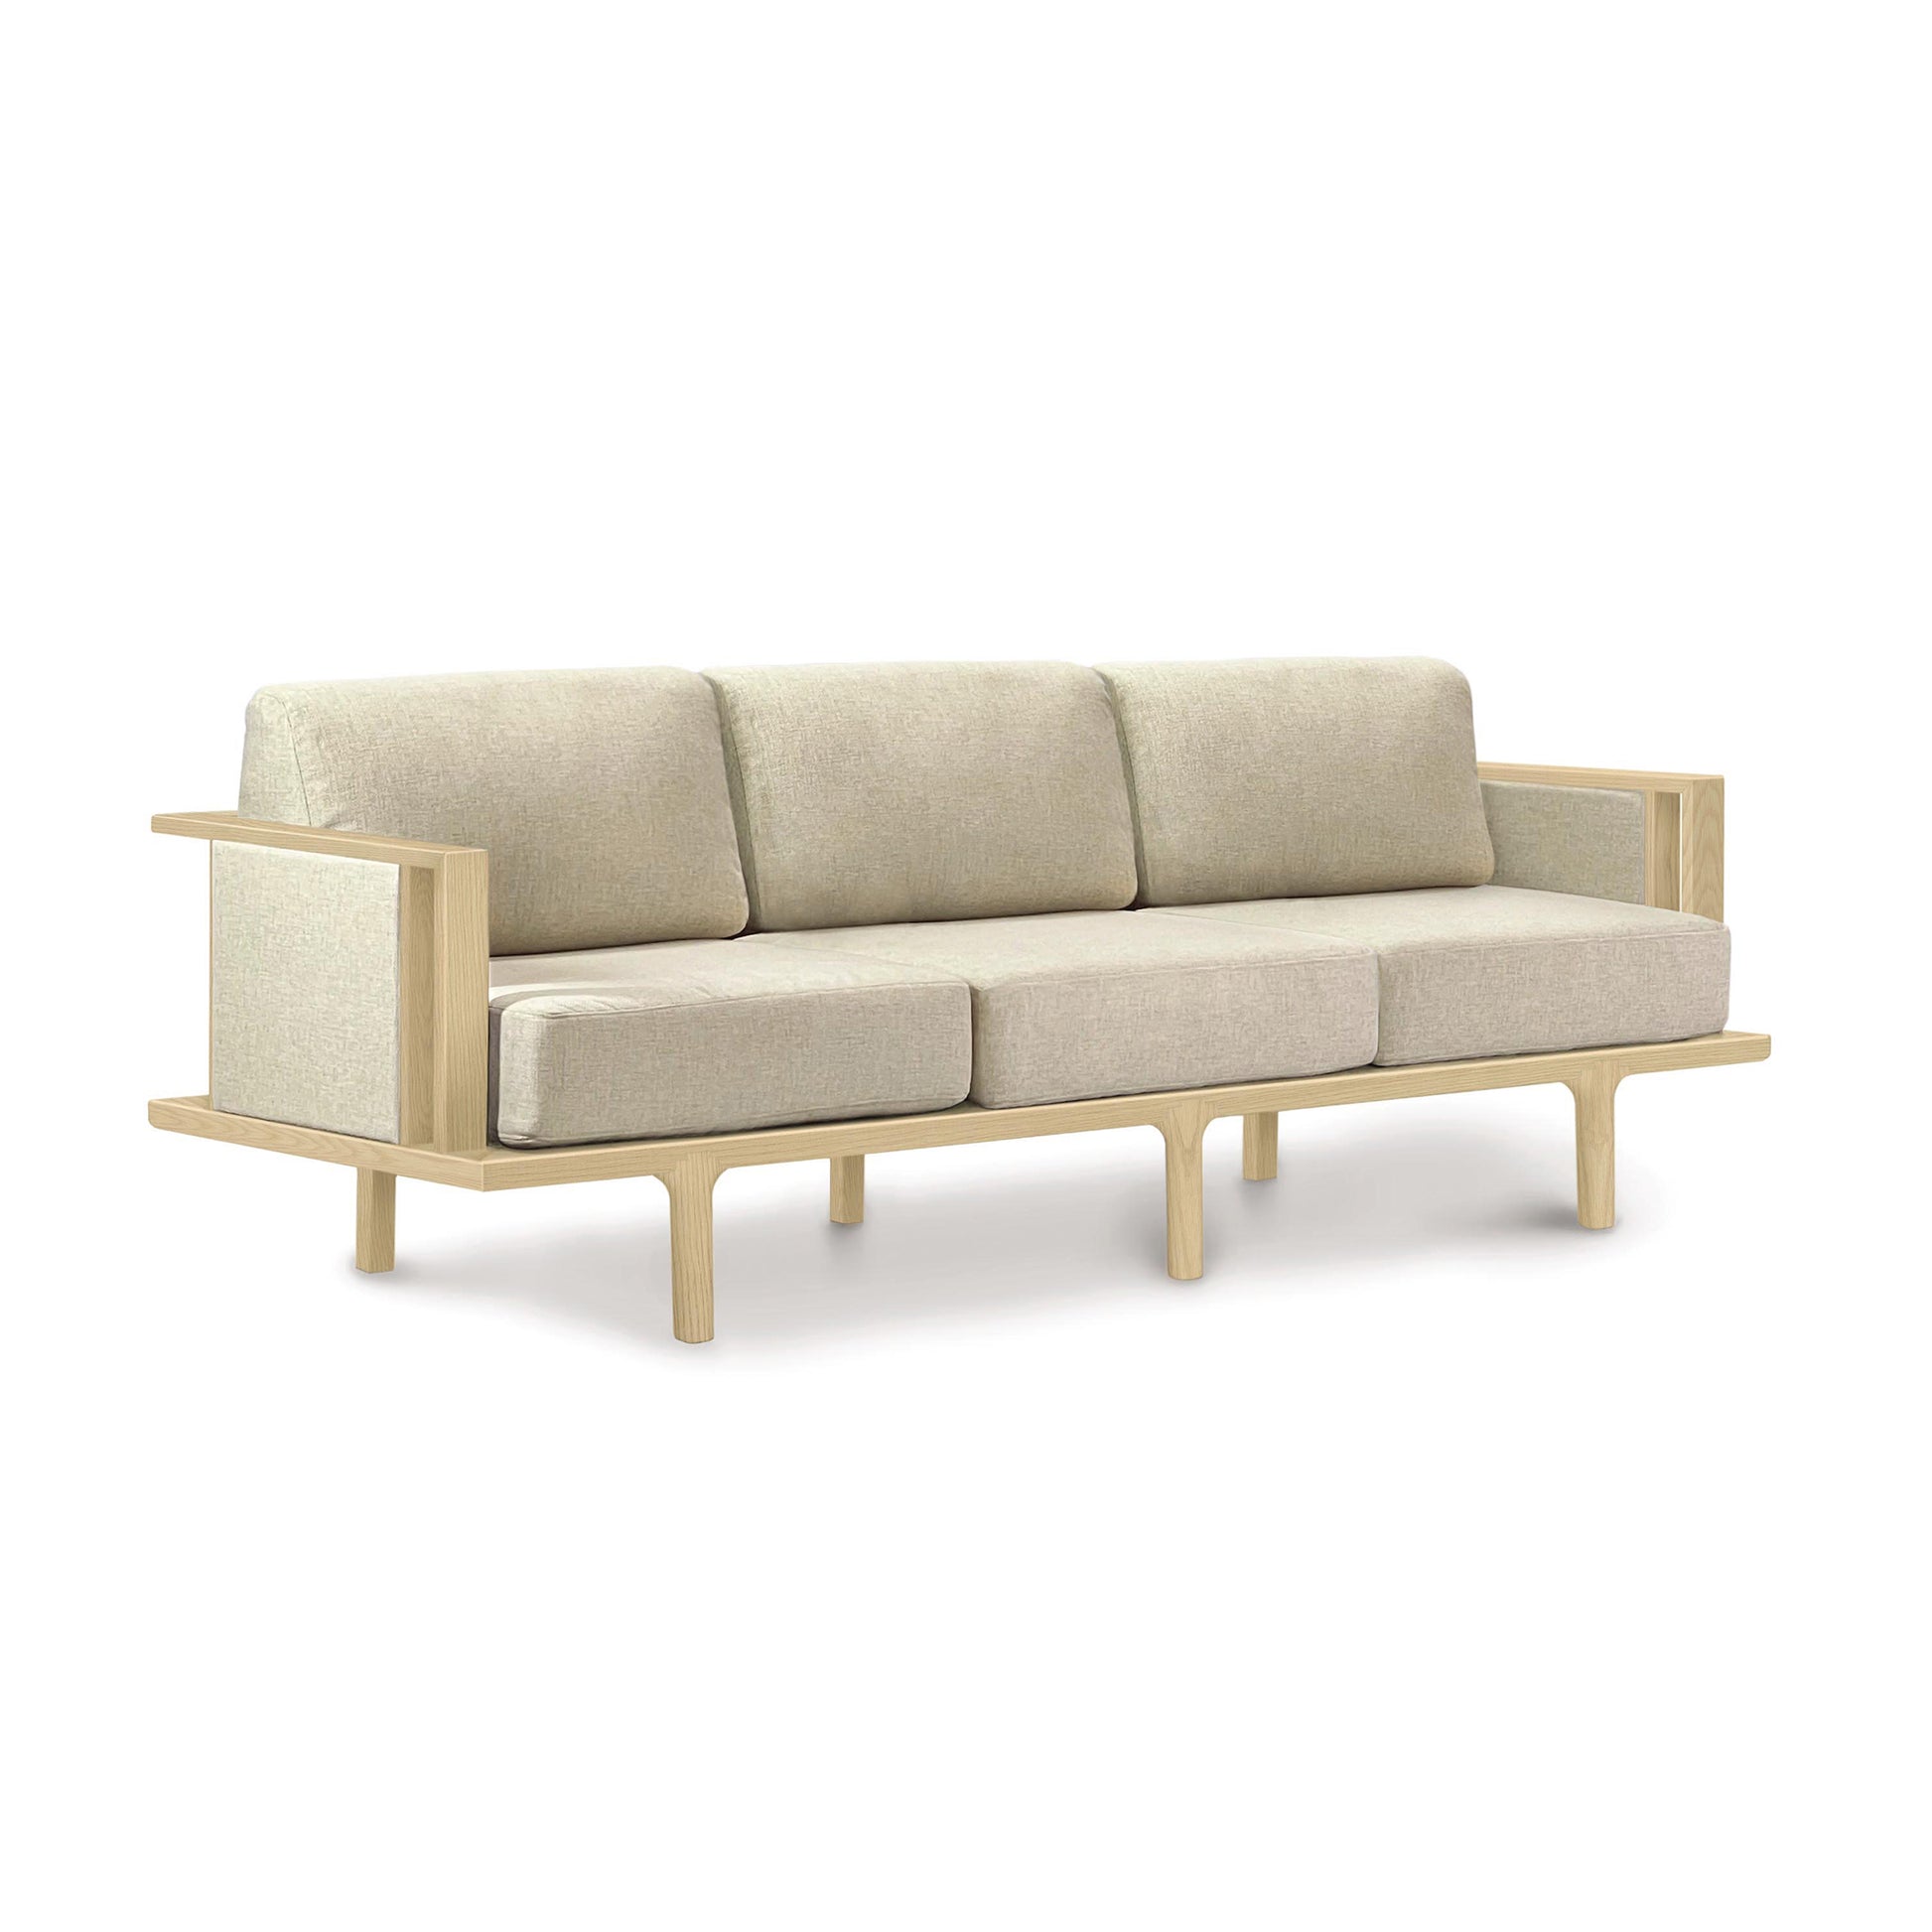 A modern Copeland Furniture Sierra Oak Upholstered Sofa with Upholstered Panels and cushions displayed against a white background.